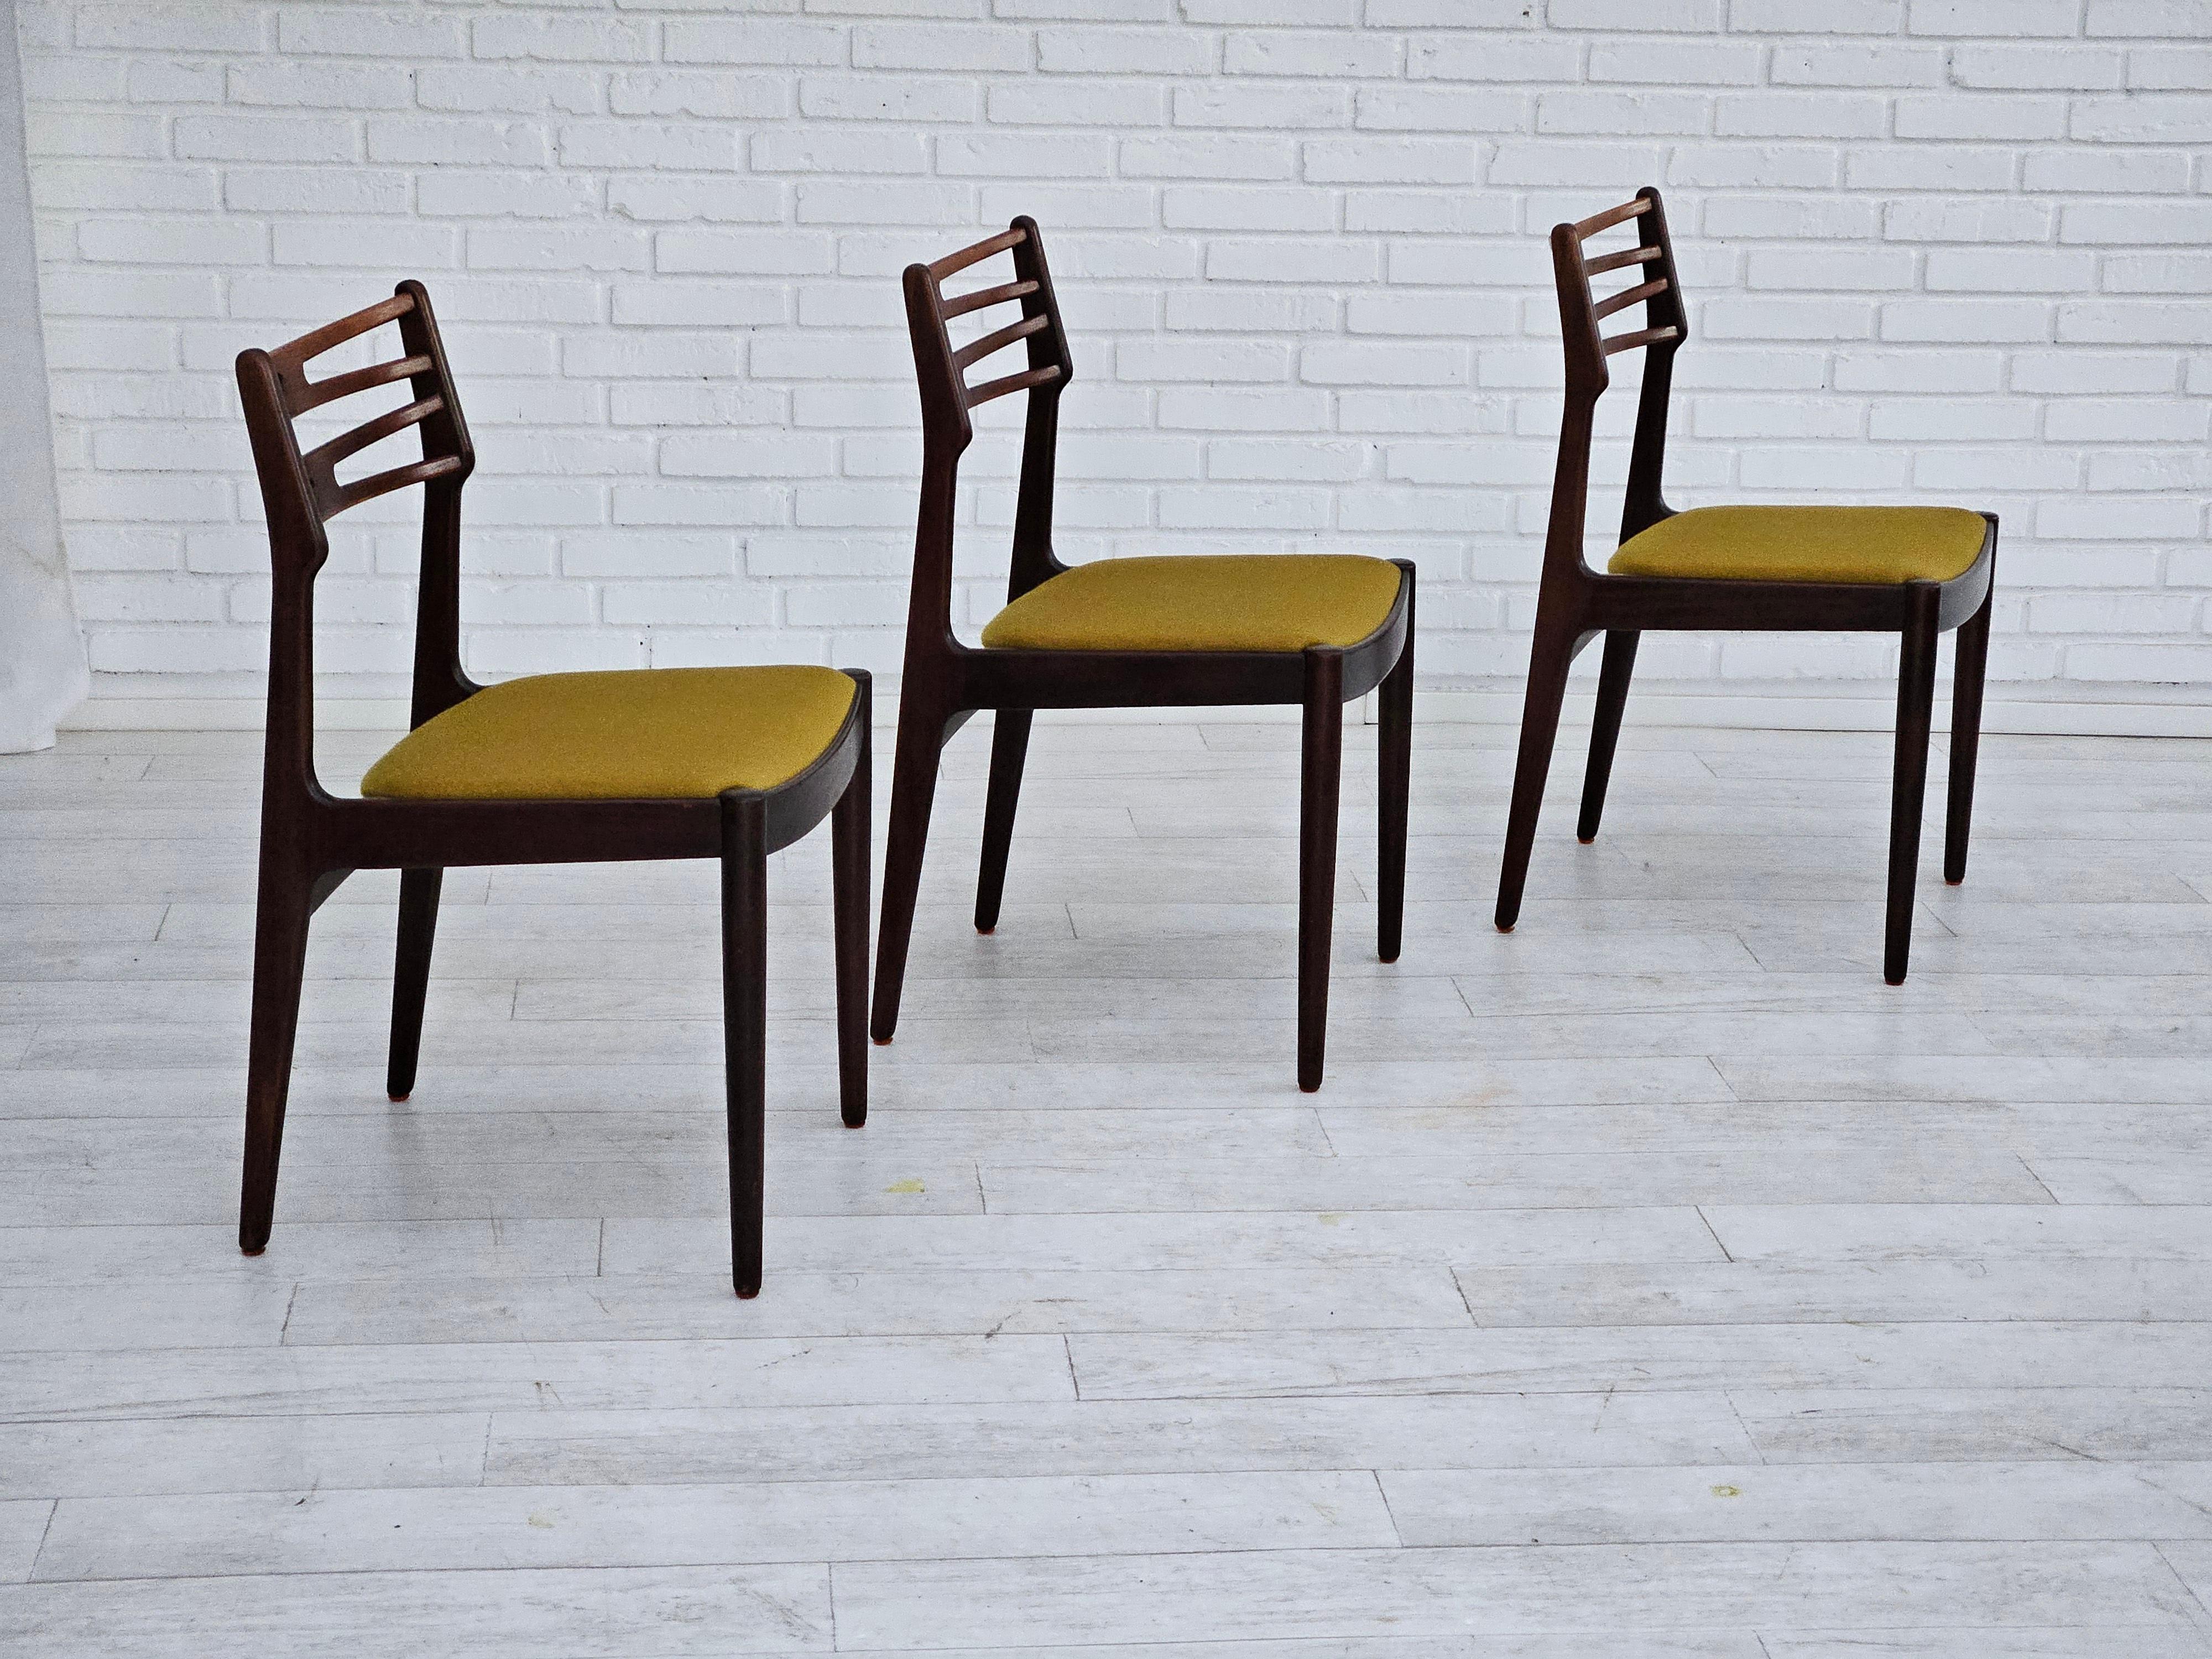 1970s, Danish design by Johannes Andersen. Set of 3 dining chairs model 101. Original very good condition: no smells and no stains. Teak wood, furniture wool. Manufactured by Danish furniture manufacturer Vamo Sønderborg in about 1970s